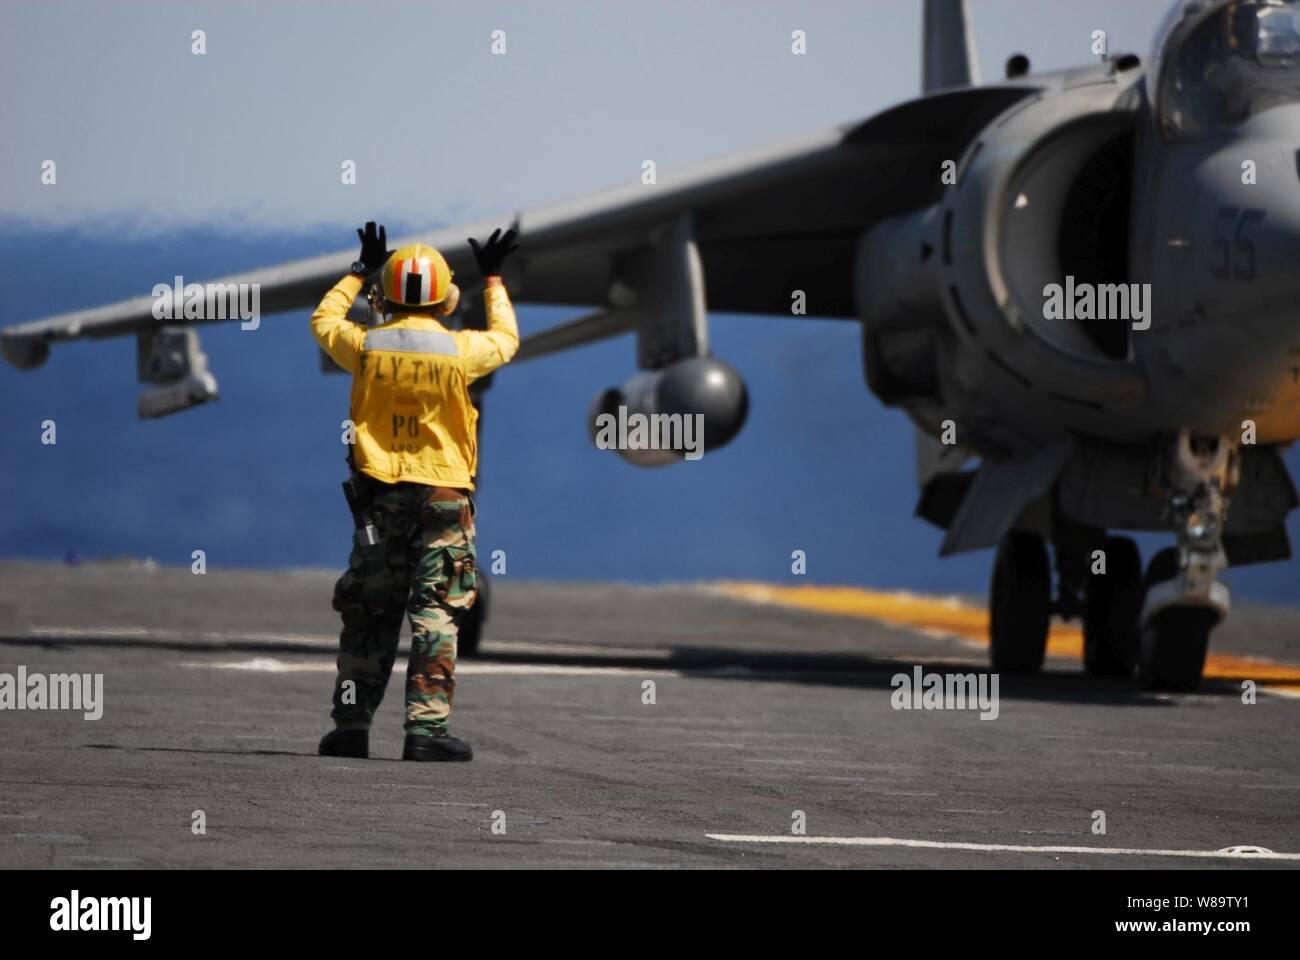 U.S. Navy Petty Officer 2nd Class Charles Imanil directs an AV-8B Harrier II aircraft onto the flight deck of the amphibious assault ship USS Kearsarge (LHD 3) on May 19, 2007.  The Kearsarge and embarked Marine Medium Helicopter Squadron 261 are participating in a composite unit training exercise in the Atlantic Ocean.  Imanil is a U.S. Navy Aviation Boatswainís Mate Handling. Stock Photo